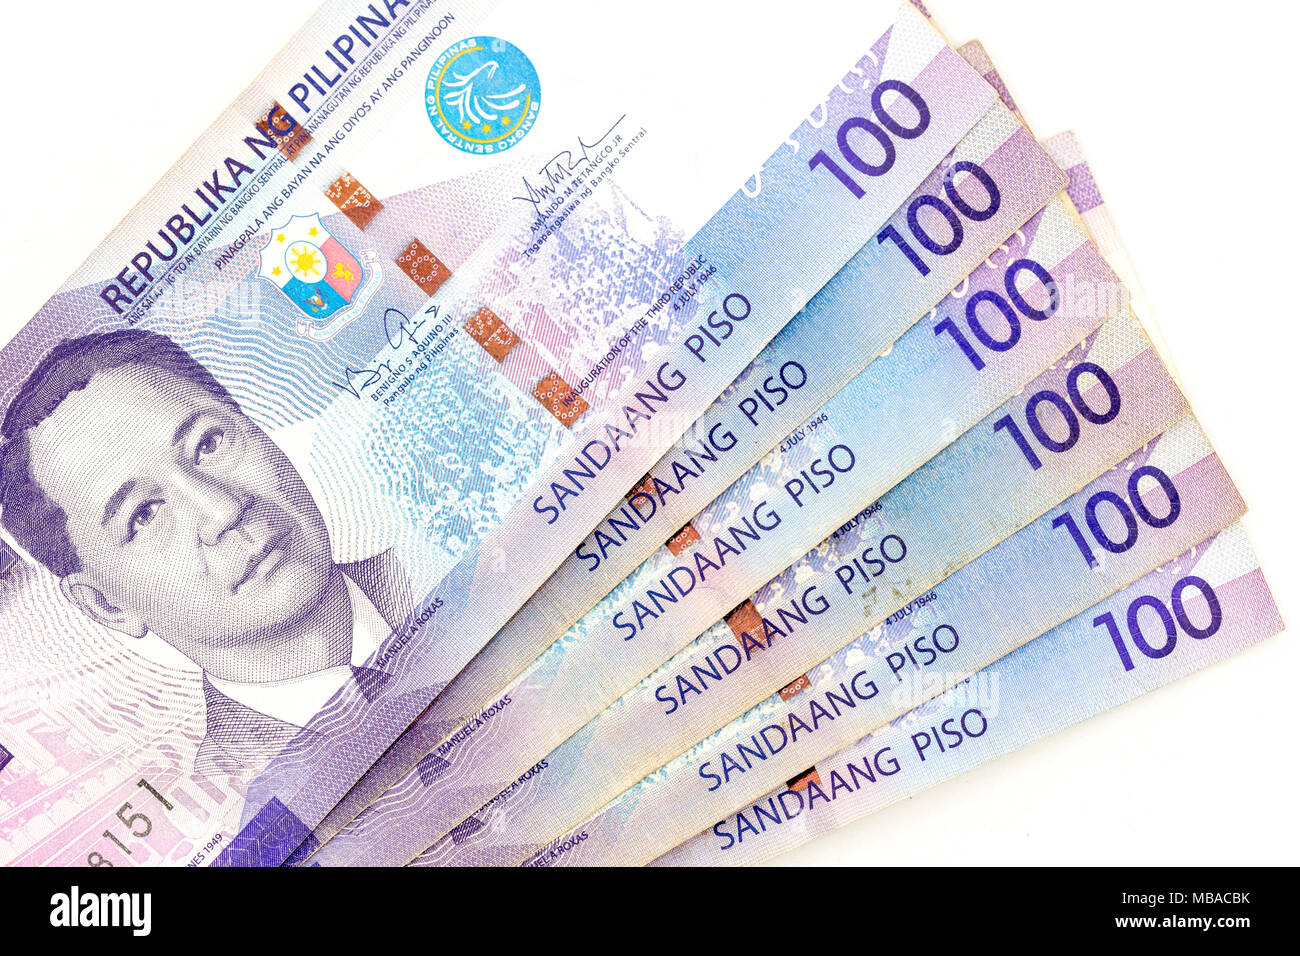 Currency banknotes spread across frame philippines peso in various denomination Stock Photo